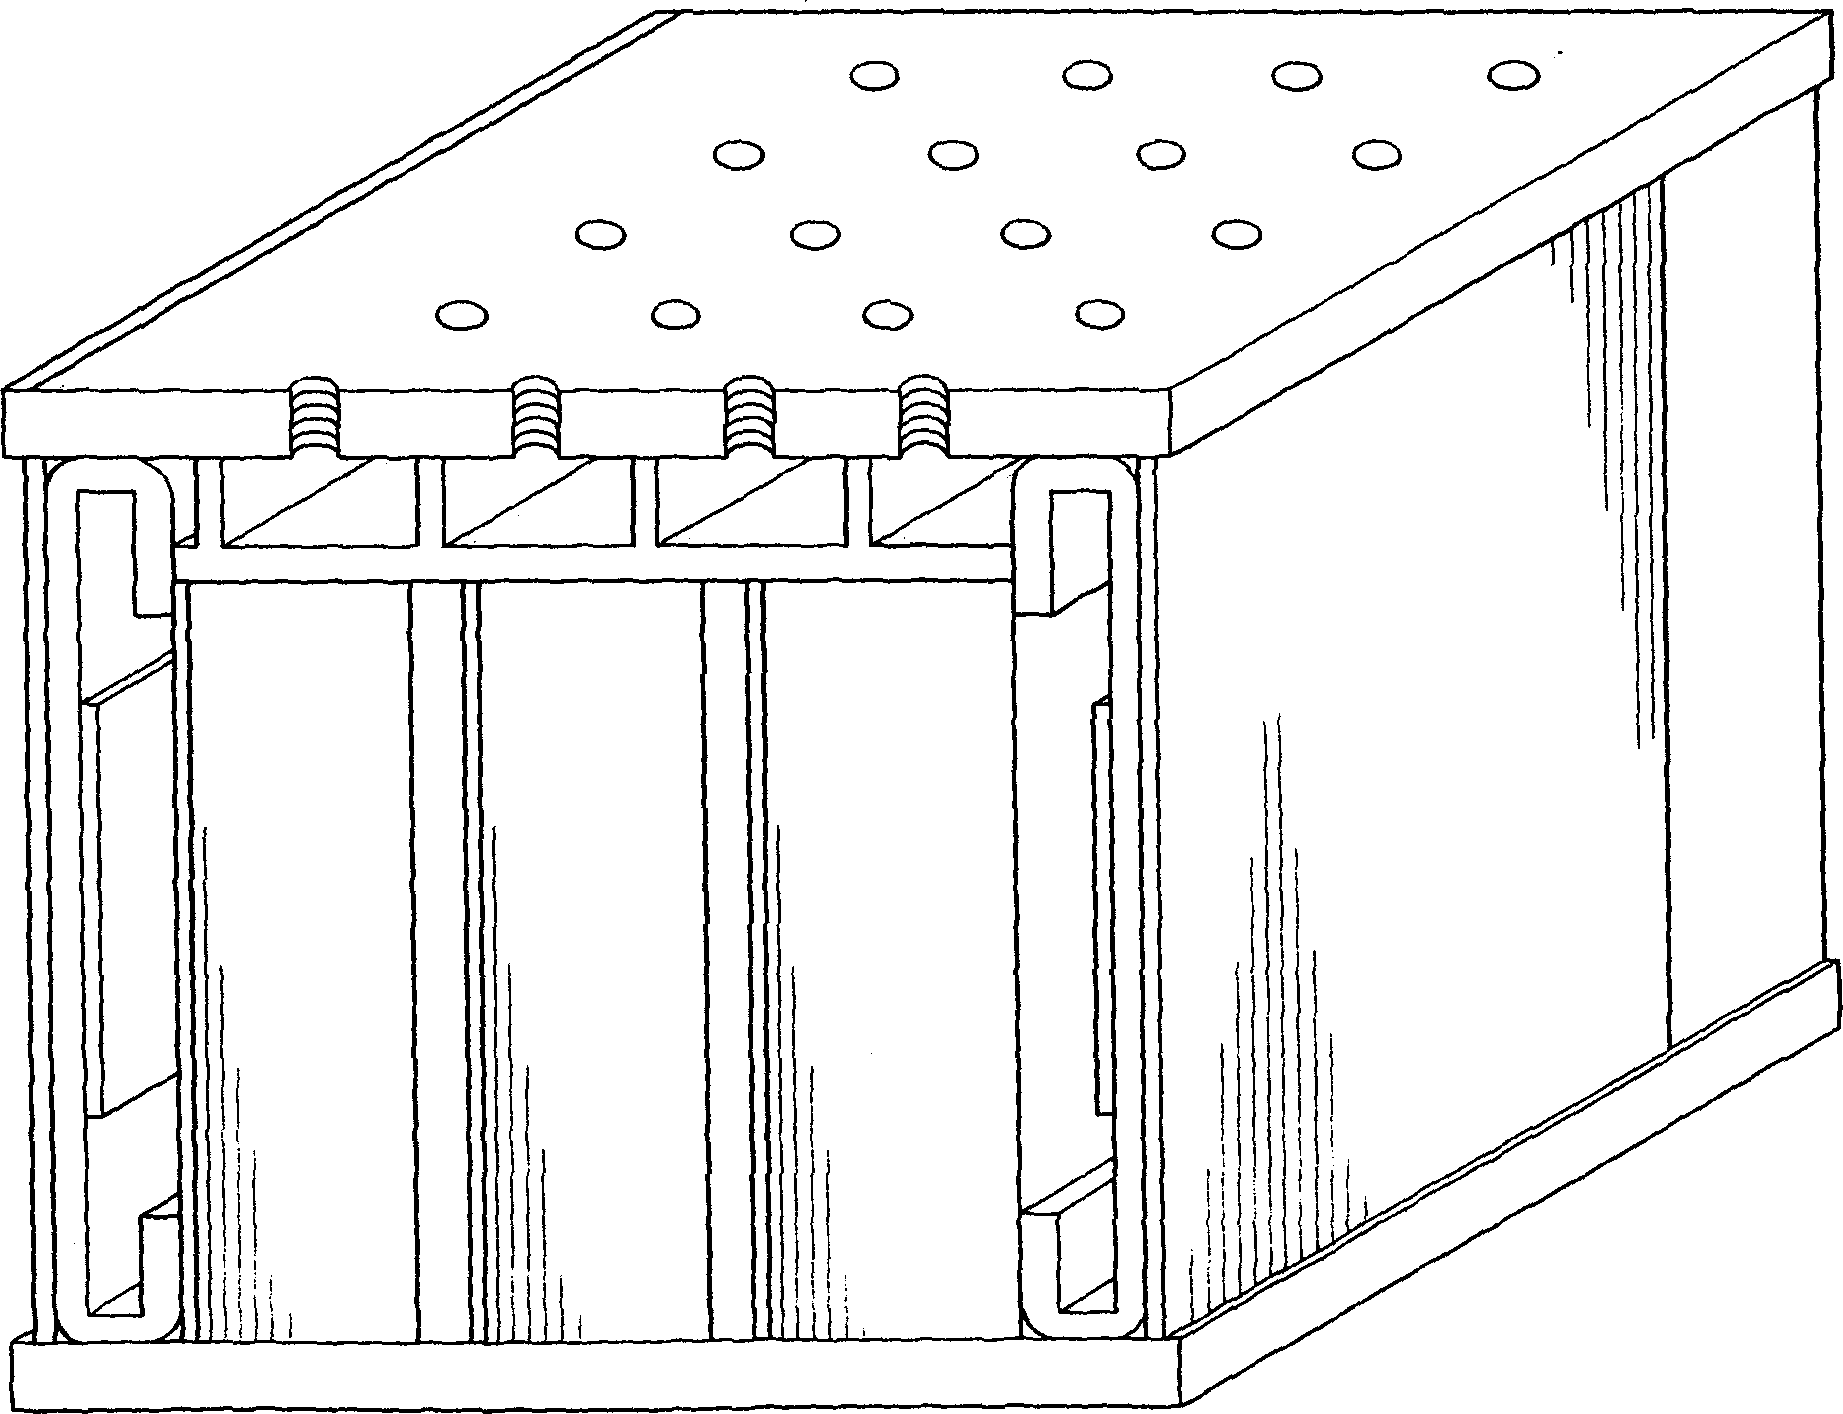 Modular structural supporter containing damping filling materials